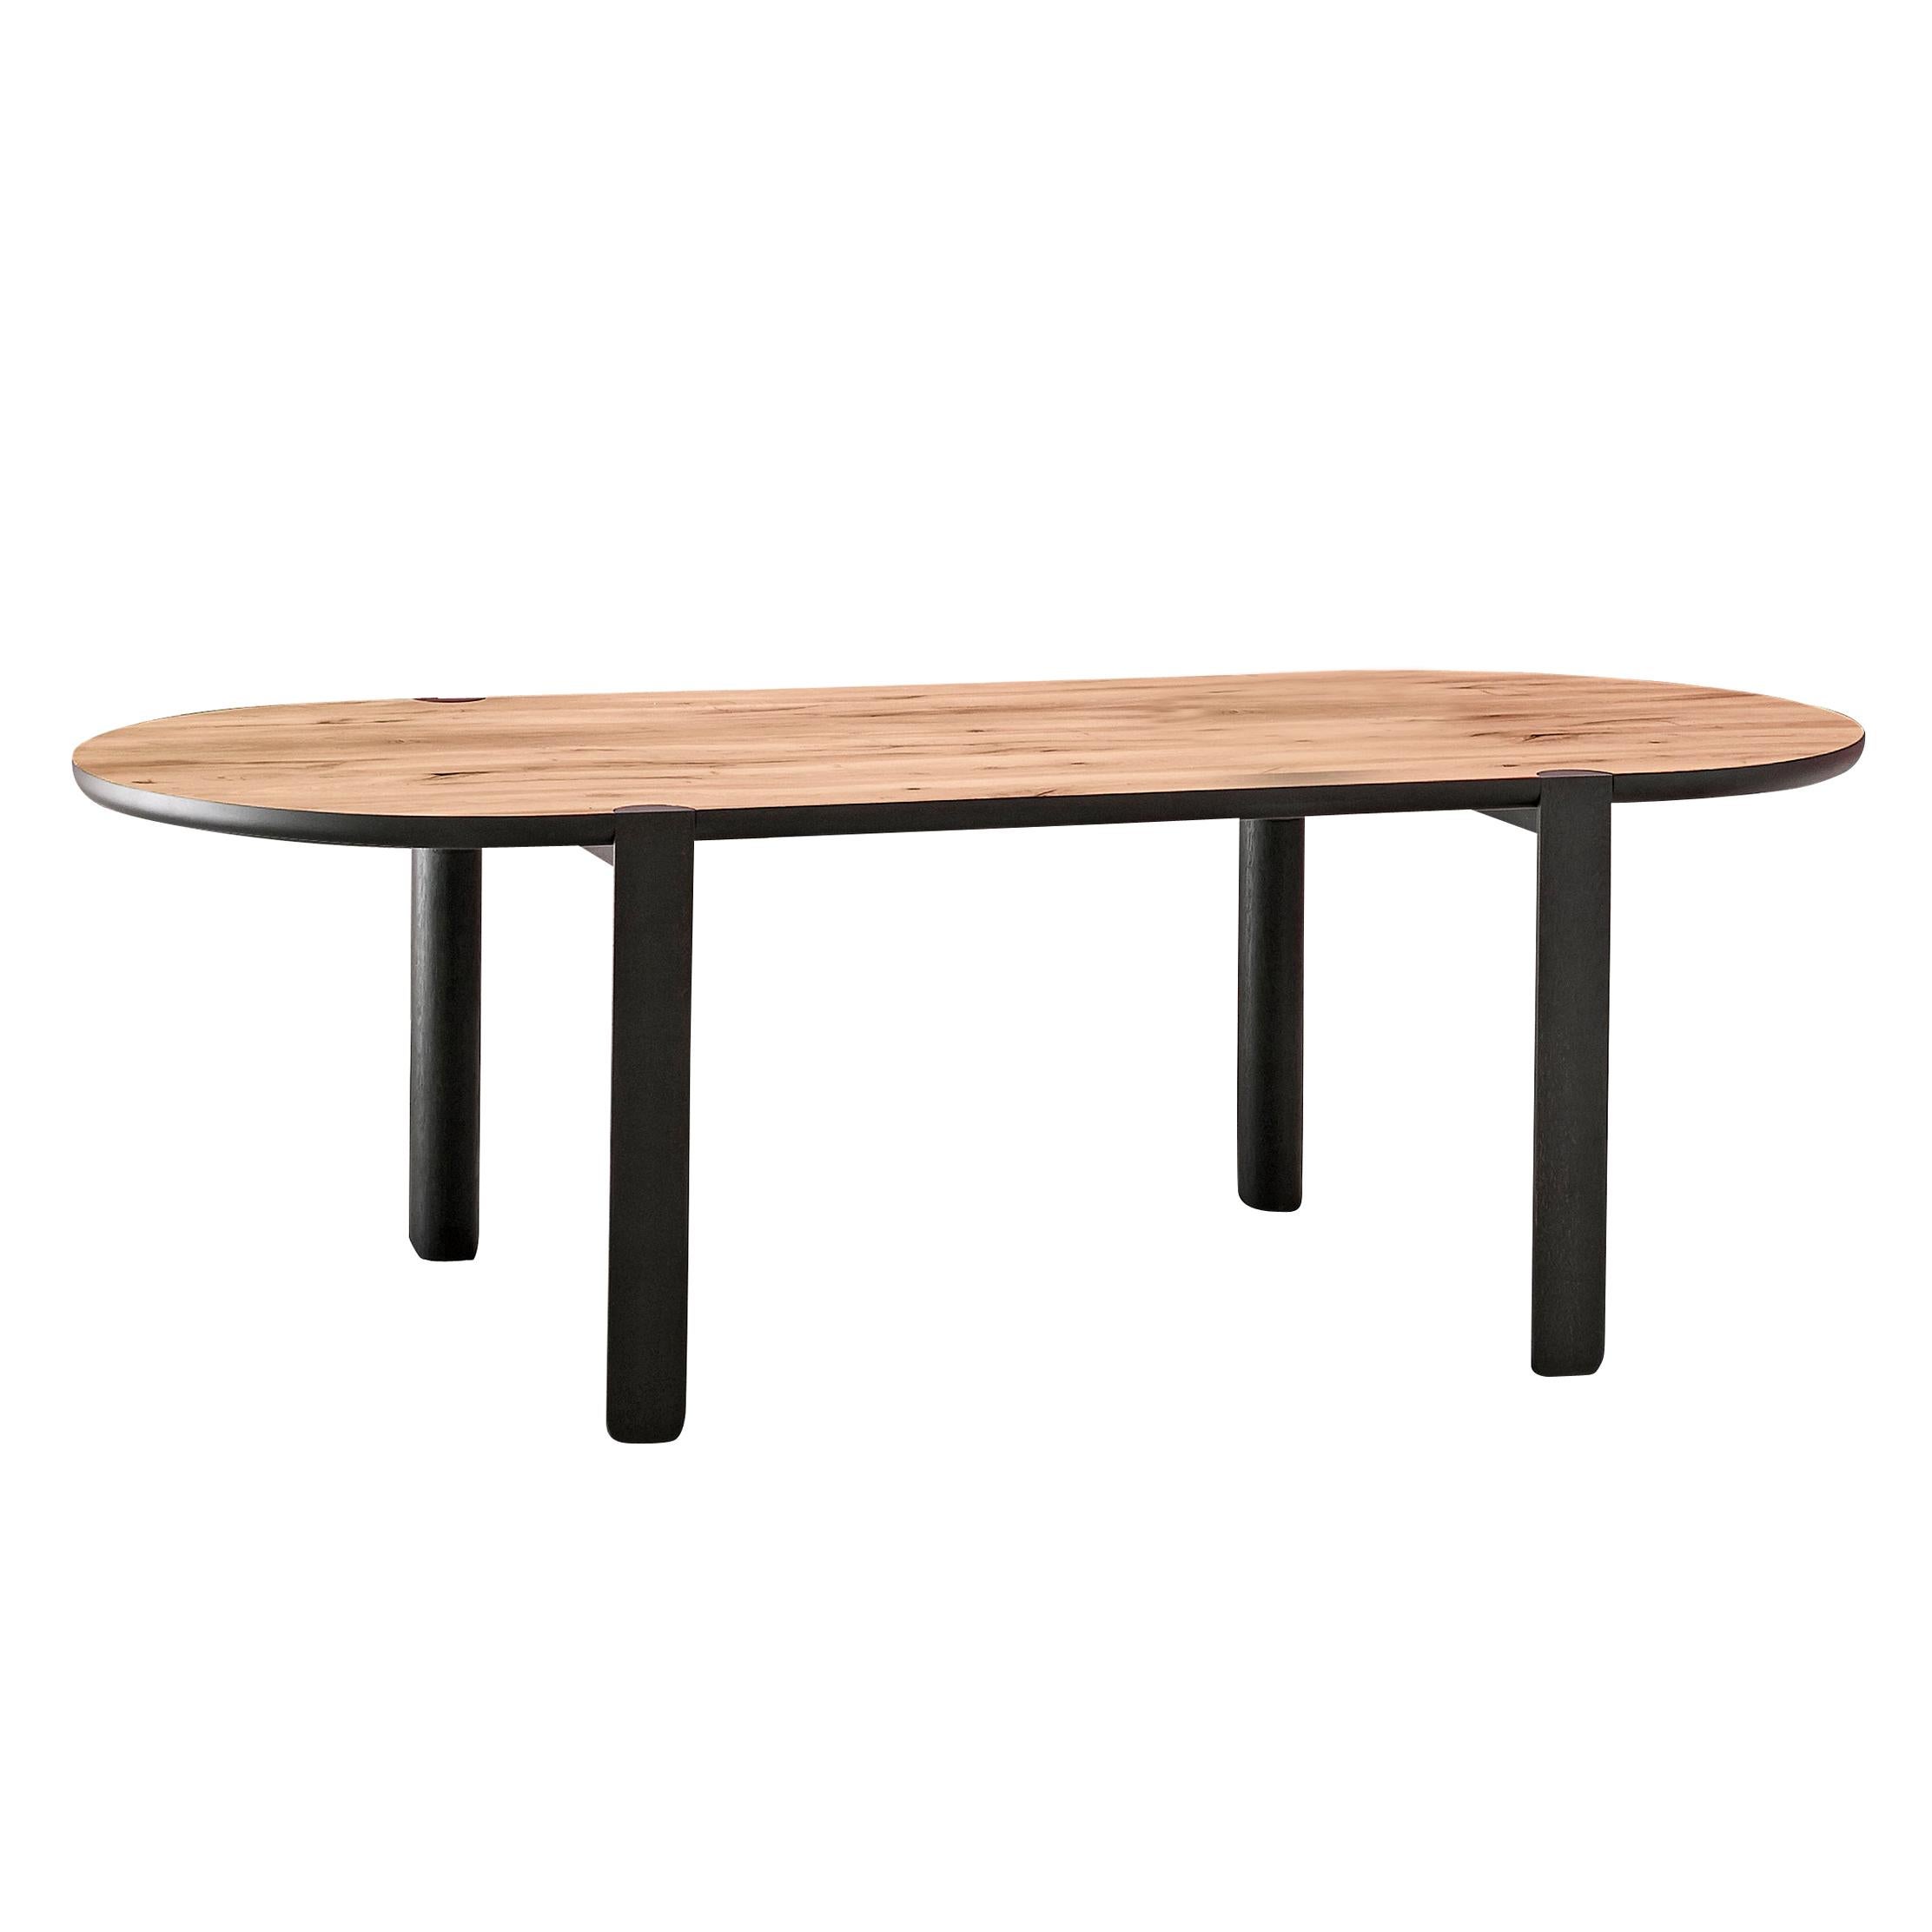 Brown (Vintage Oak) Ovo Large Dining Table in Black Ash Legs, by E-GGS